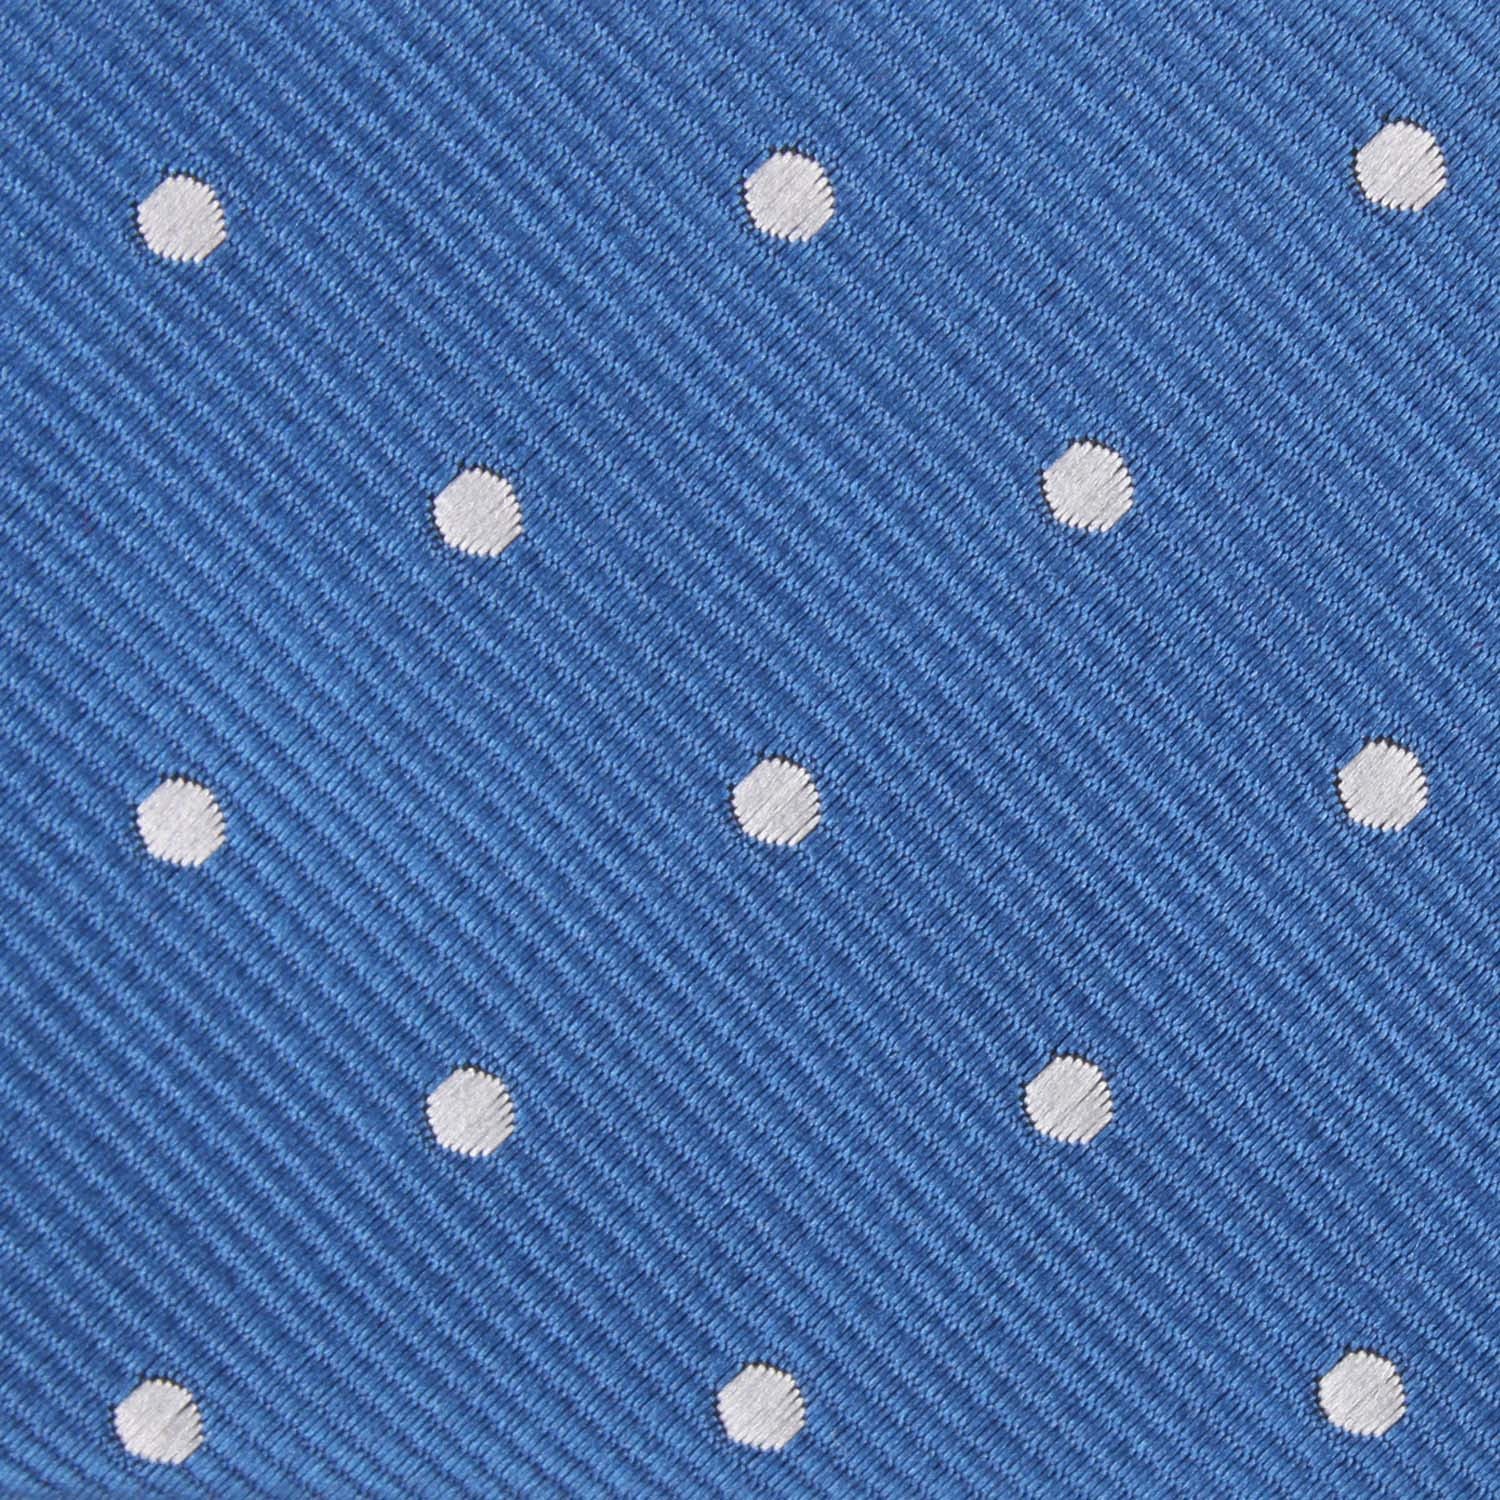 Royal Blue with White Polka Dots Fabric Kids Bow Tie M125